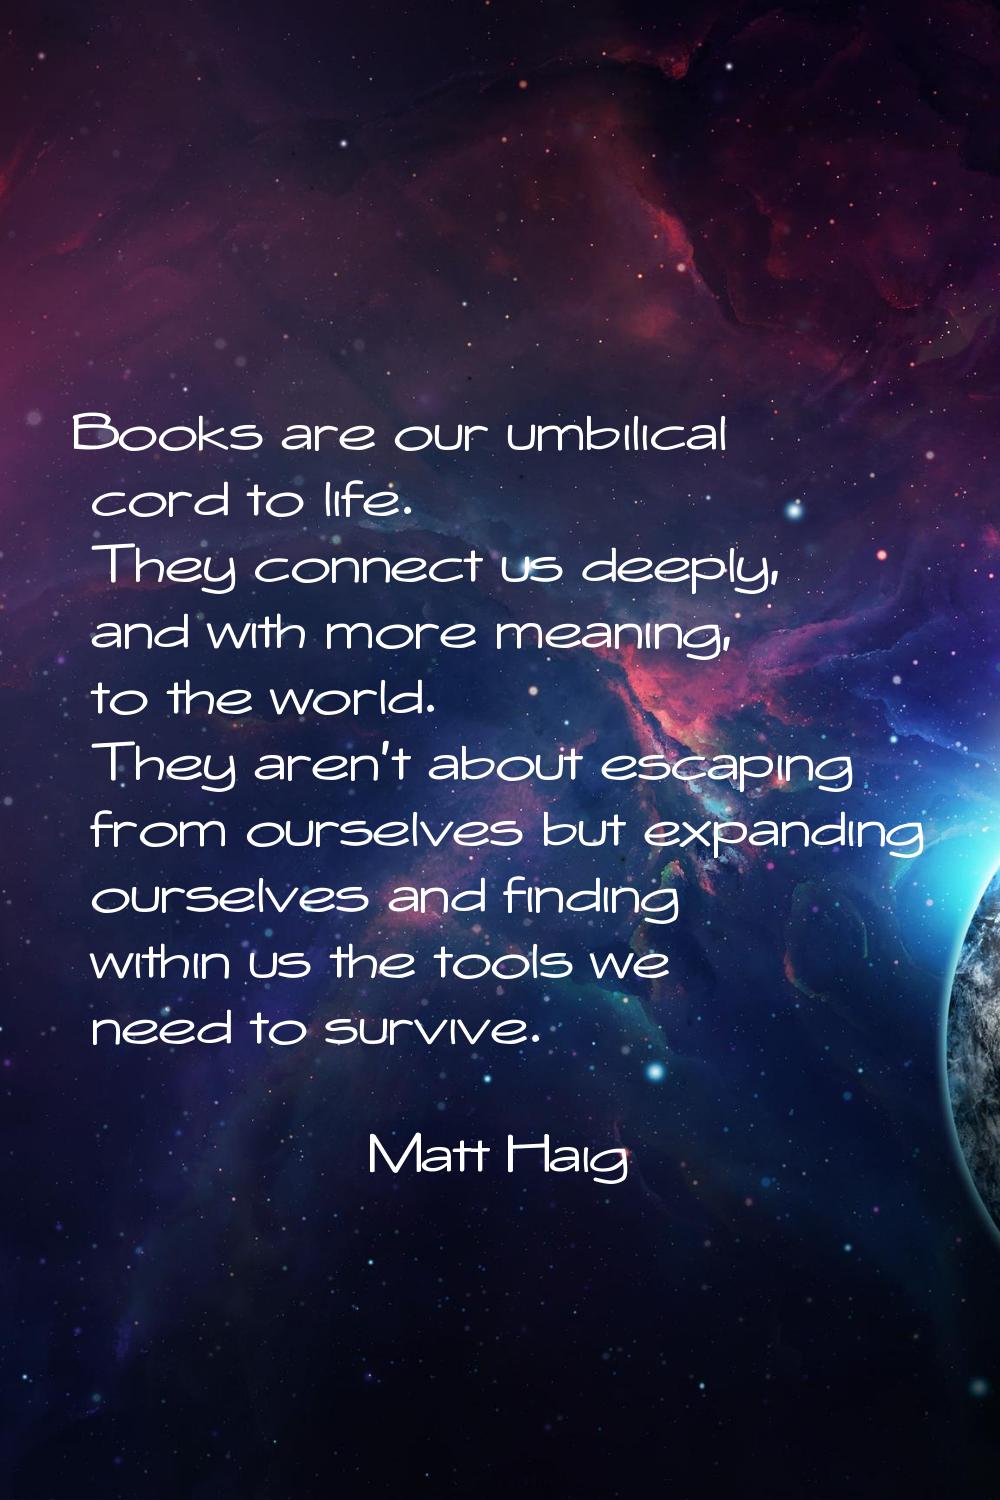 Books are our umbilical cord to life. They connect us deeply, and with more meaning, to the world. 